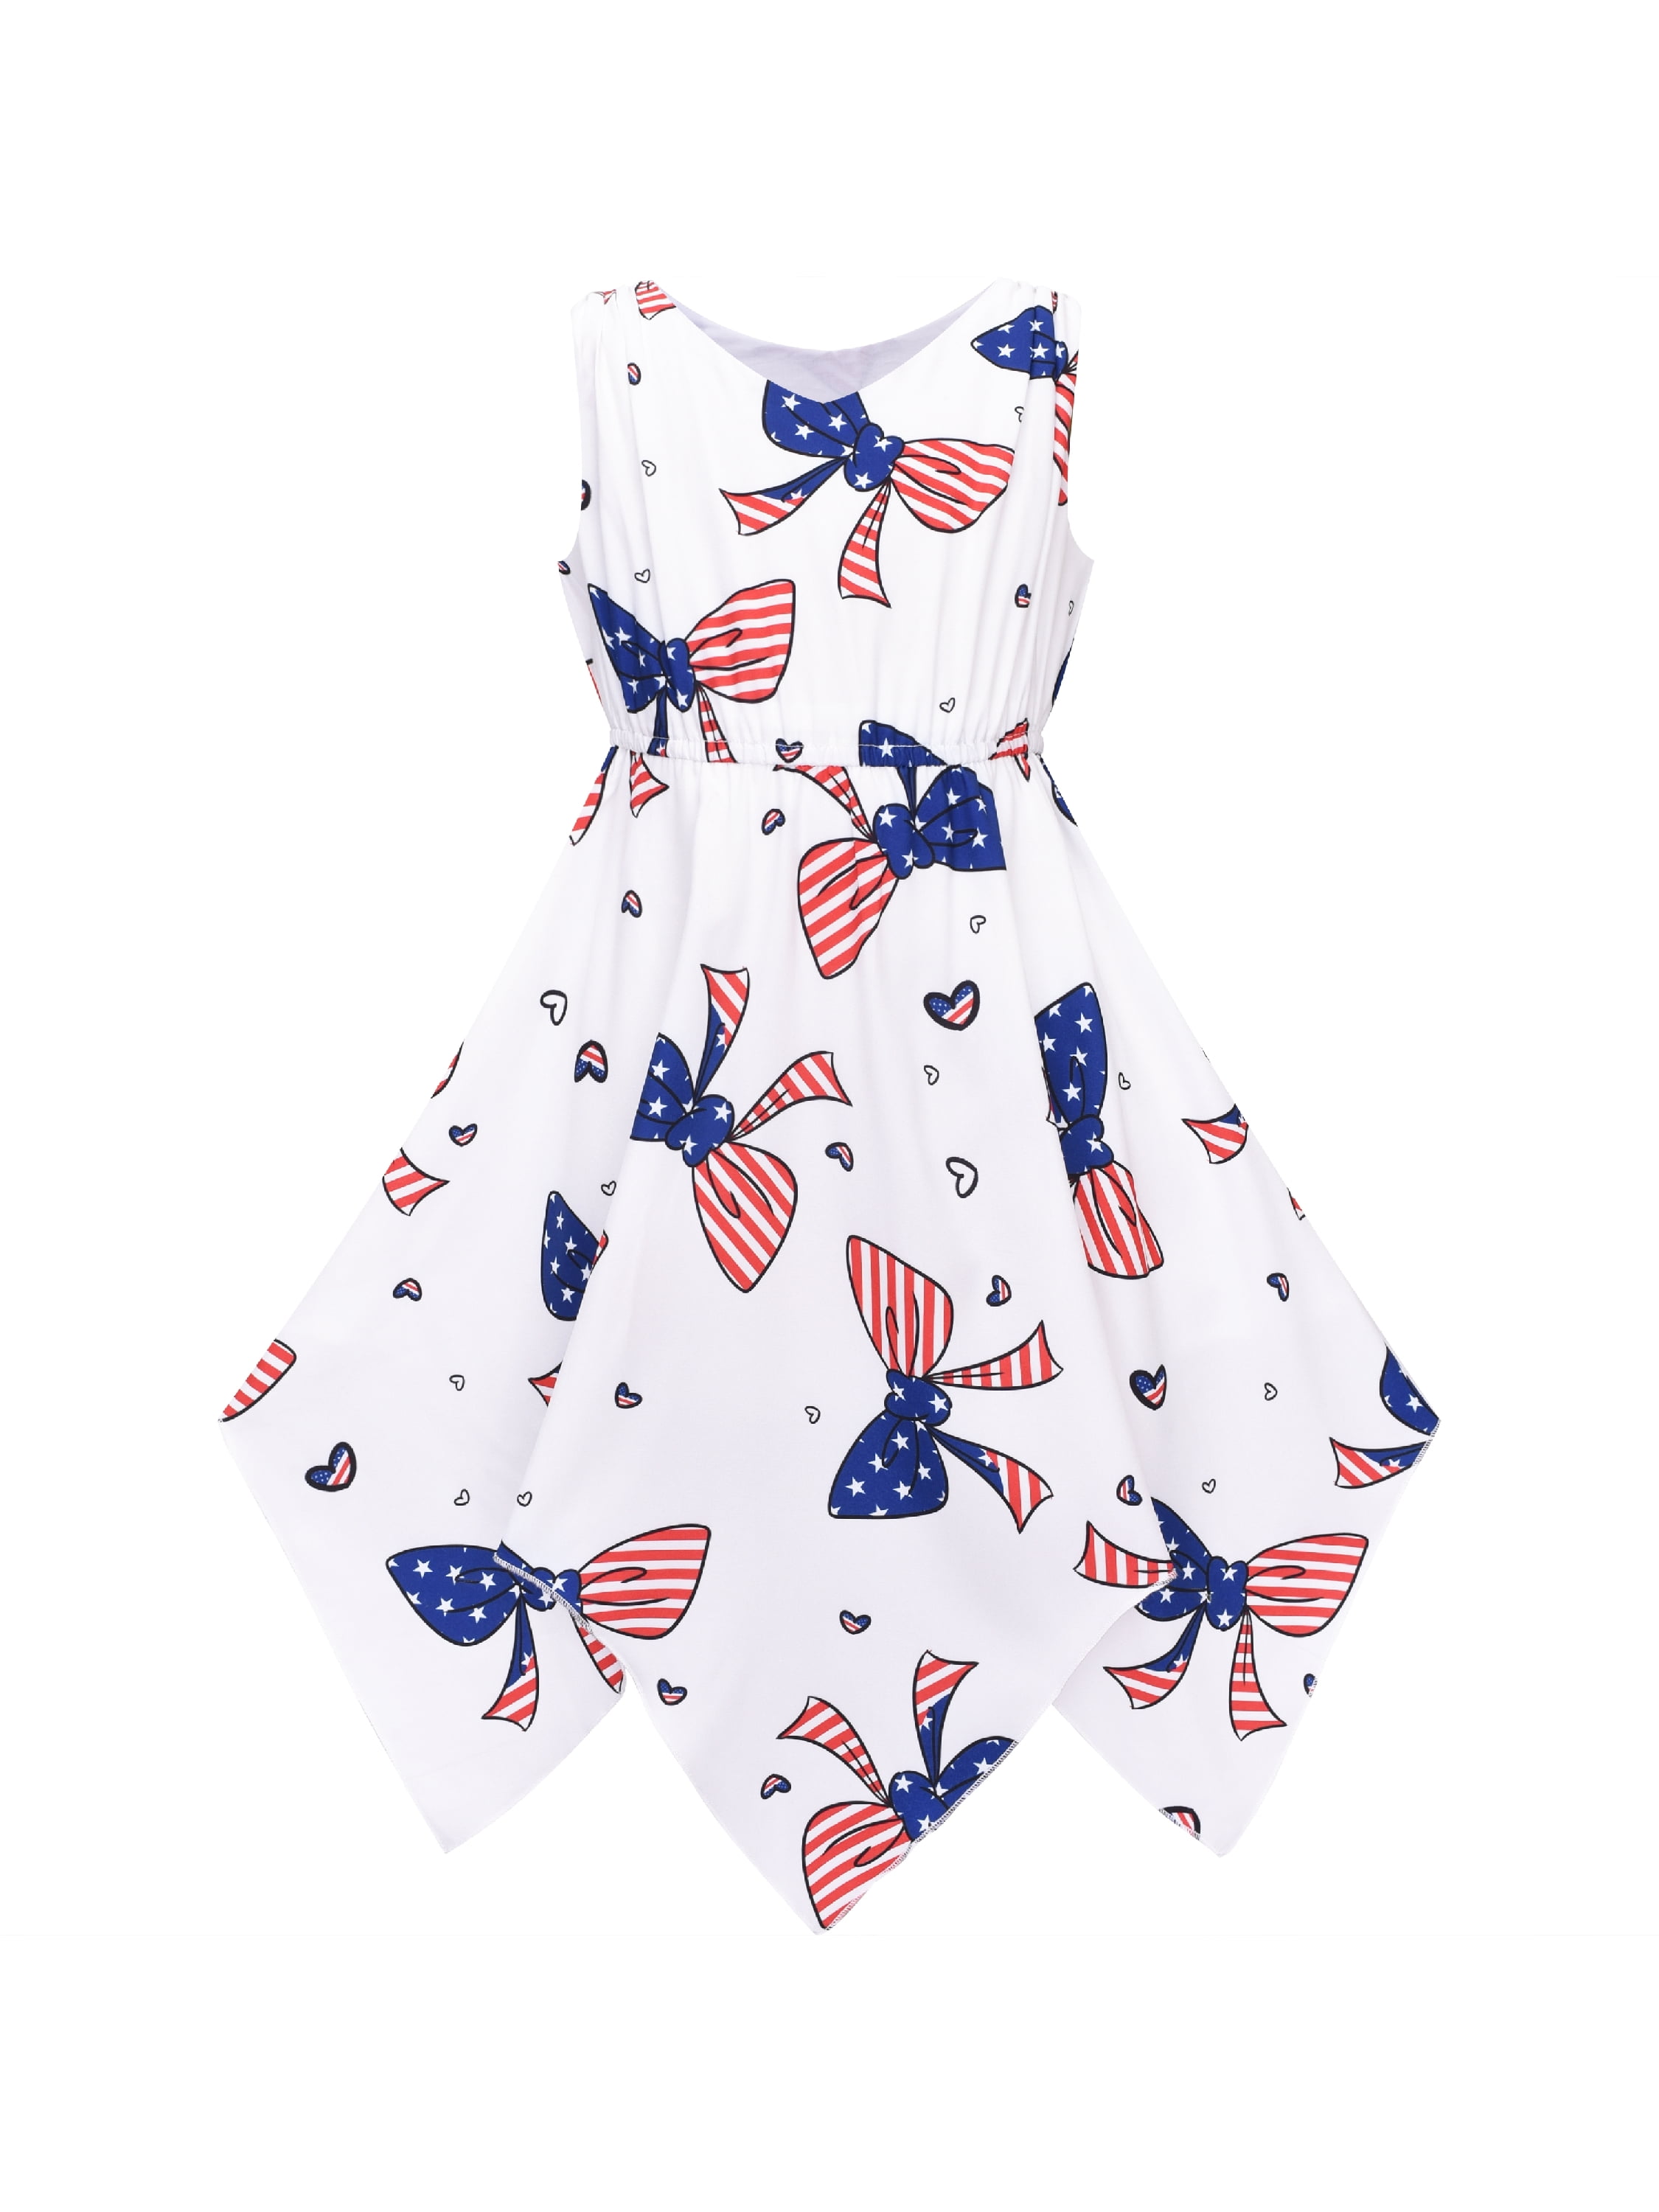 American Flag On Wooden Planks Wall Baby Girls Short Sleeve T-Shirt Flounced Summer Shirt Dress for 2-6 Years Old Baby 